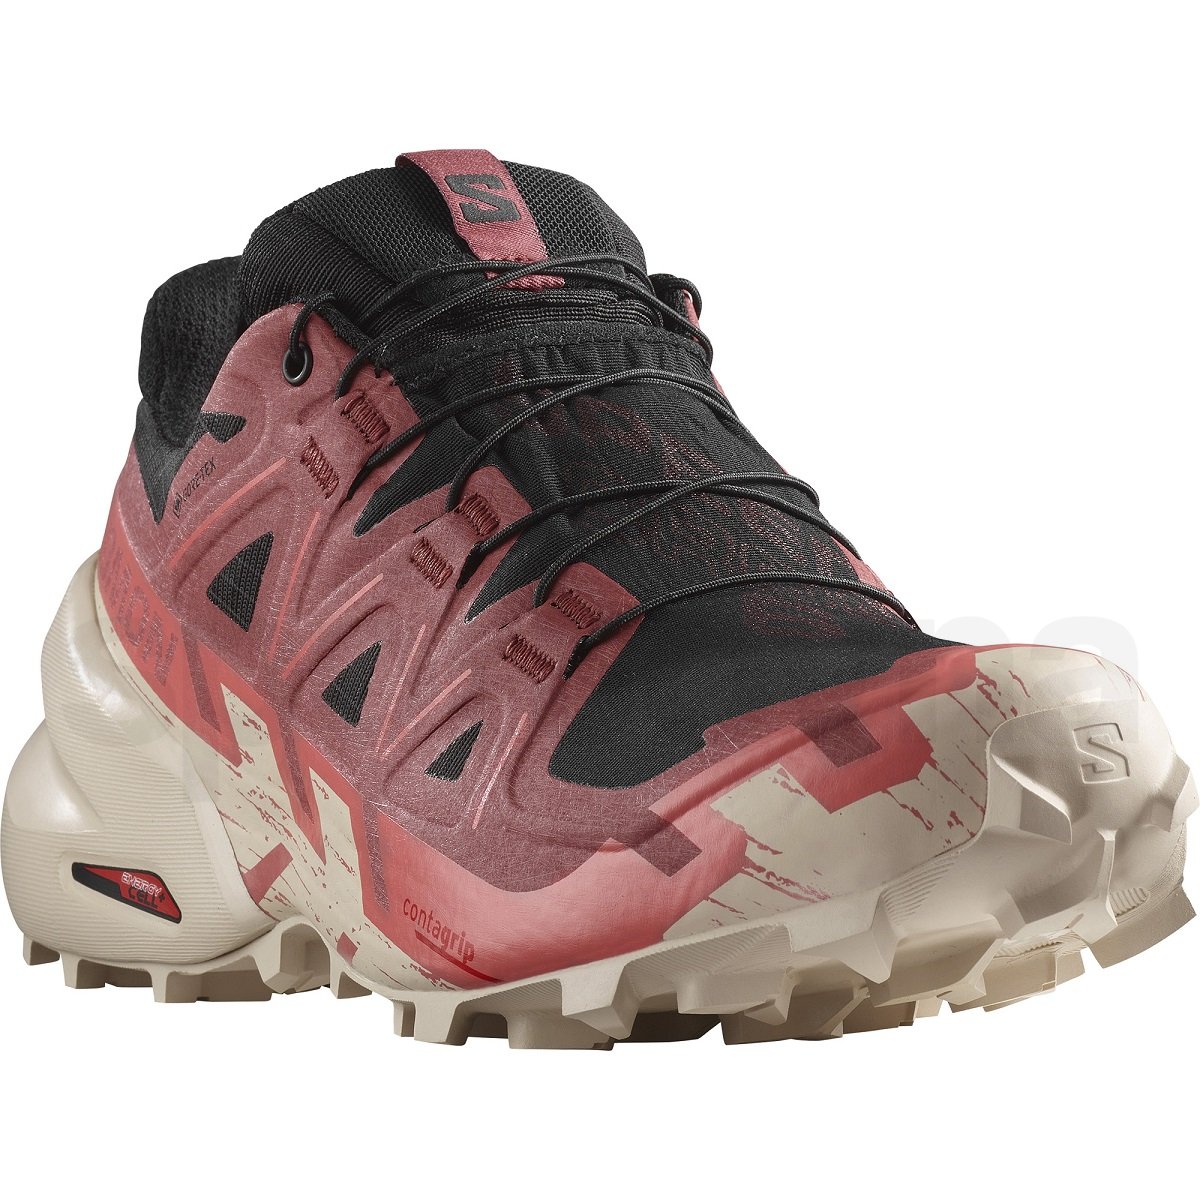 L47302100_5_GHO_SPEEDCROSS 6 GTX WBlack_Cow Hide_Faded Rose.png.high-res